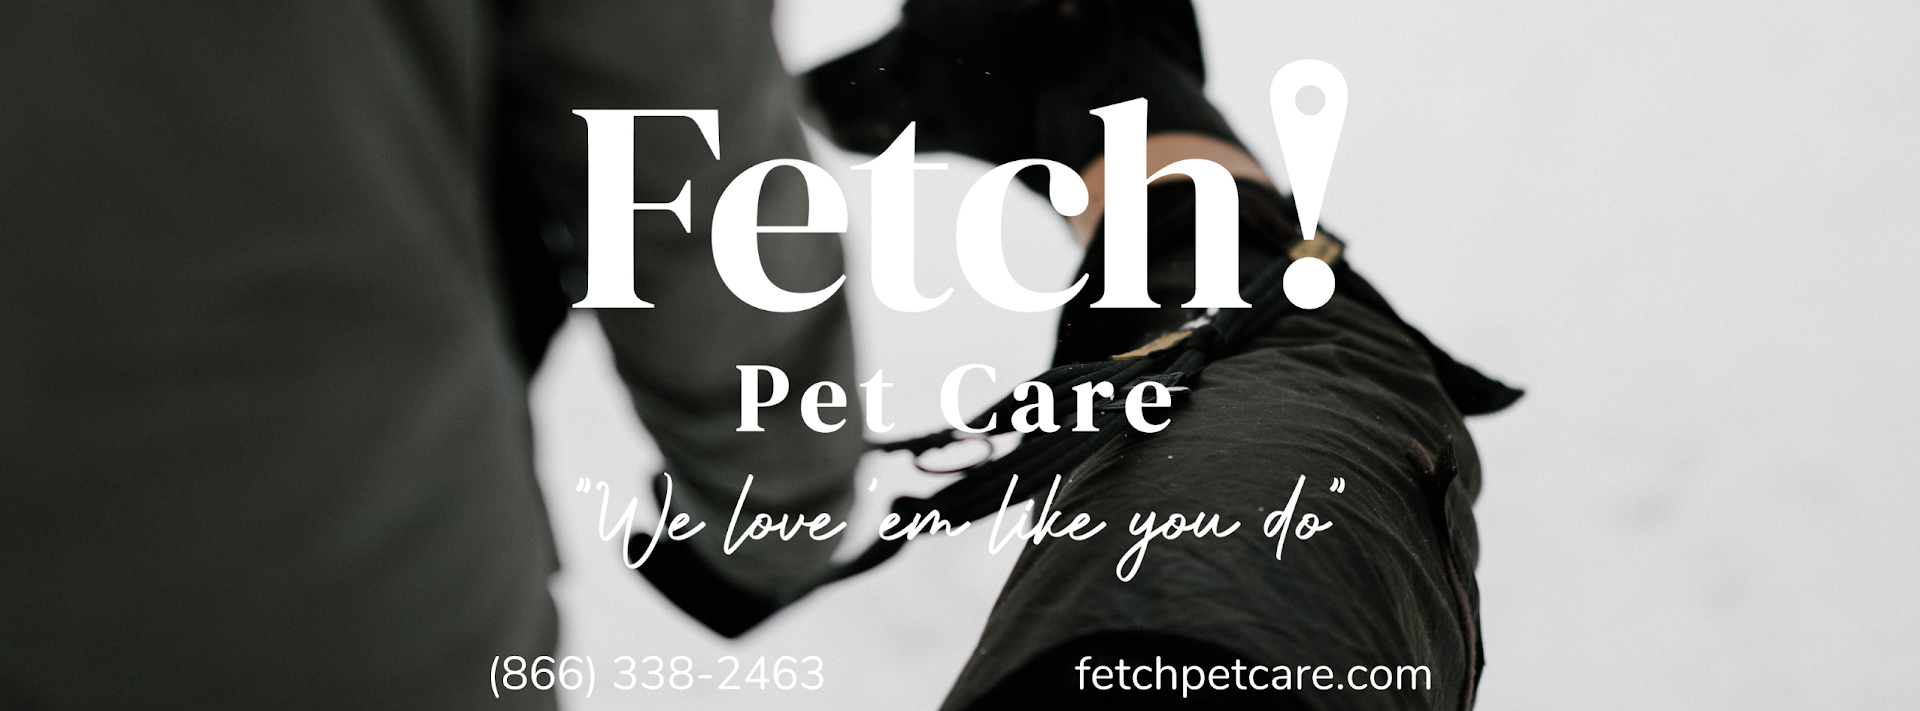 Fetch! Pet Care of Greater Schaumburg